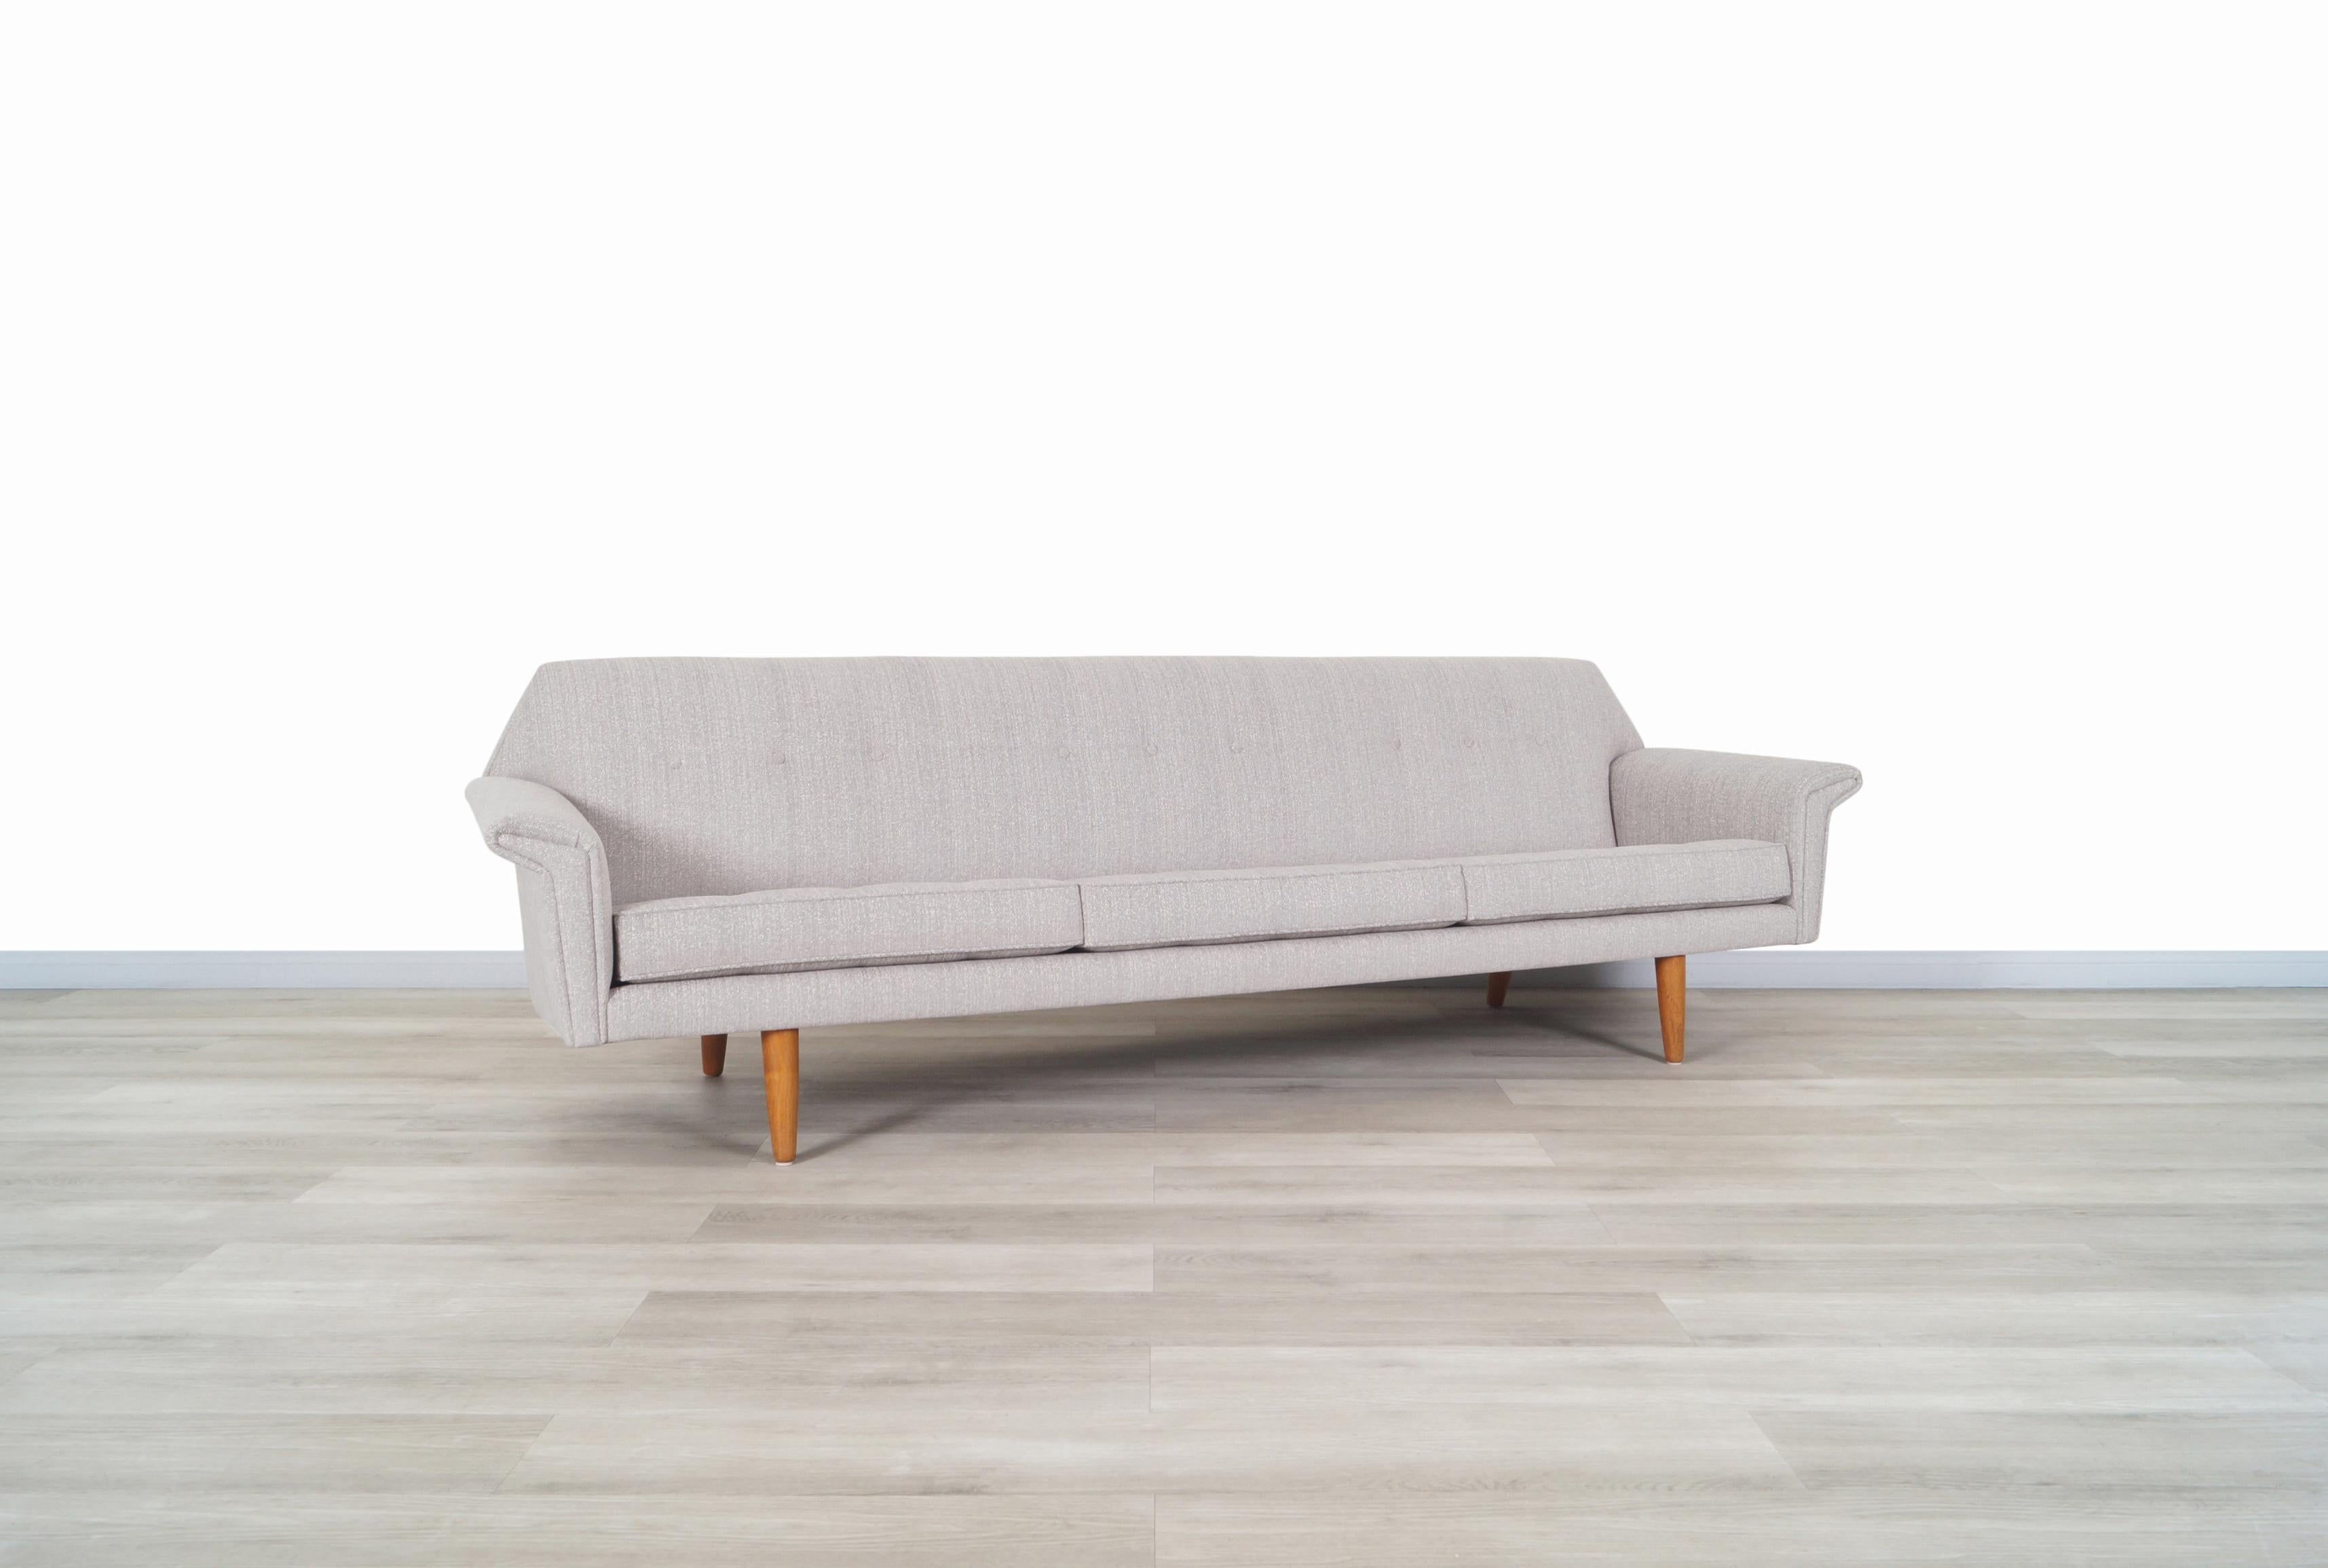 Exceptional Danish modern teak “wing” sofa designed and manufactured in Denmark, circa 1960s. The design of the armrests that are shape as wings and the geometric shape back blends perfectly with the structure of the sofa. It sits on solid teak